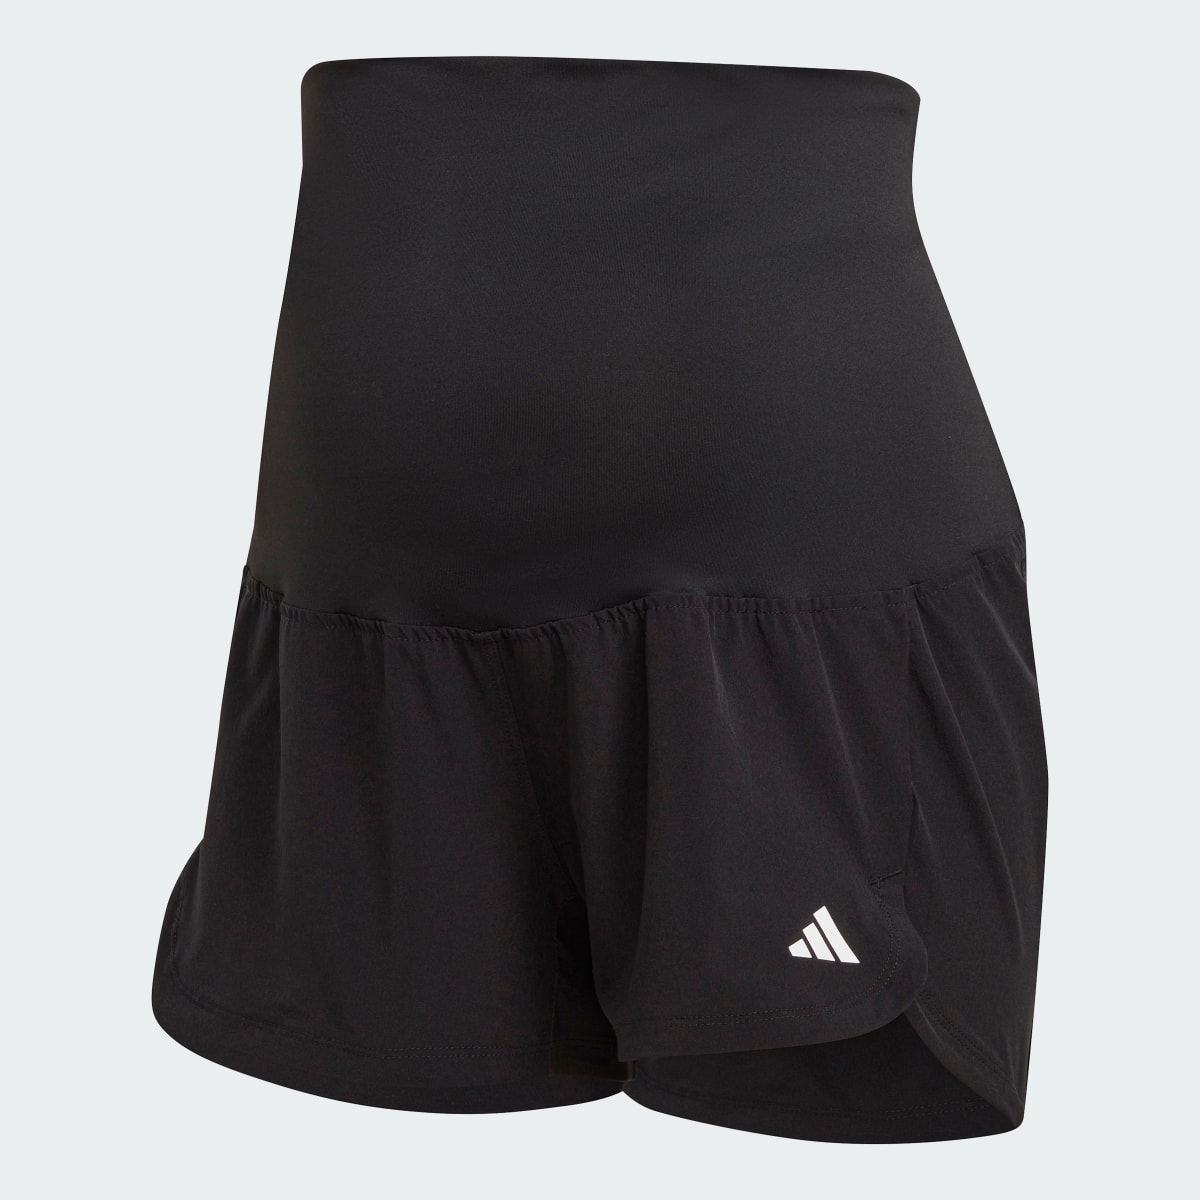 Adidas Pacer Woven Stretch Training Maternity Şort. 5